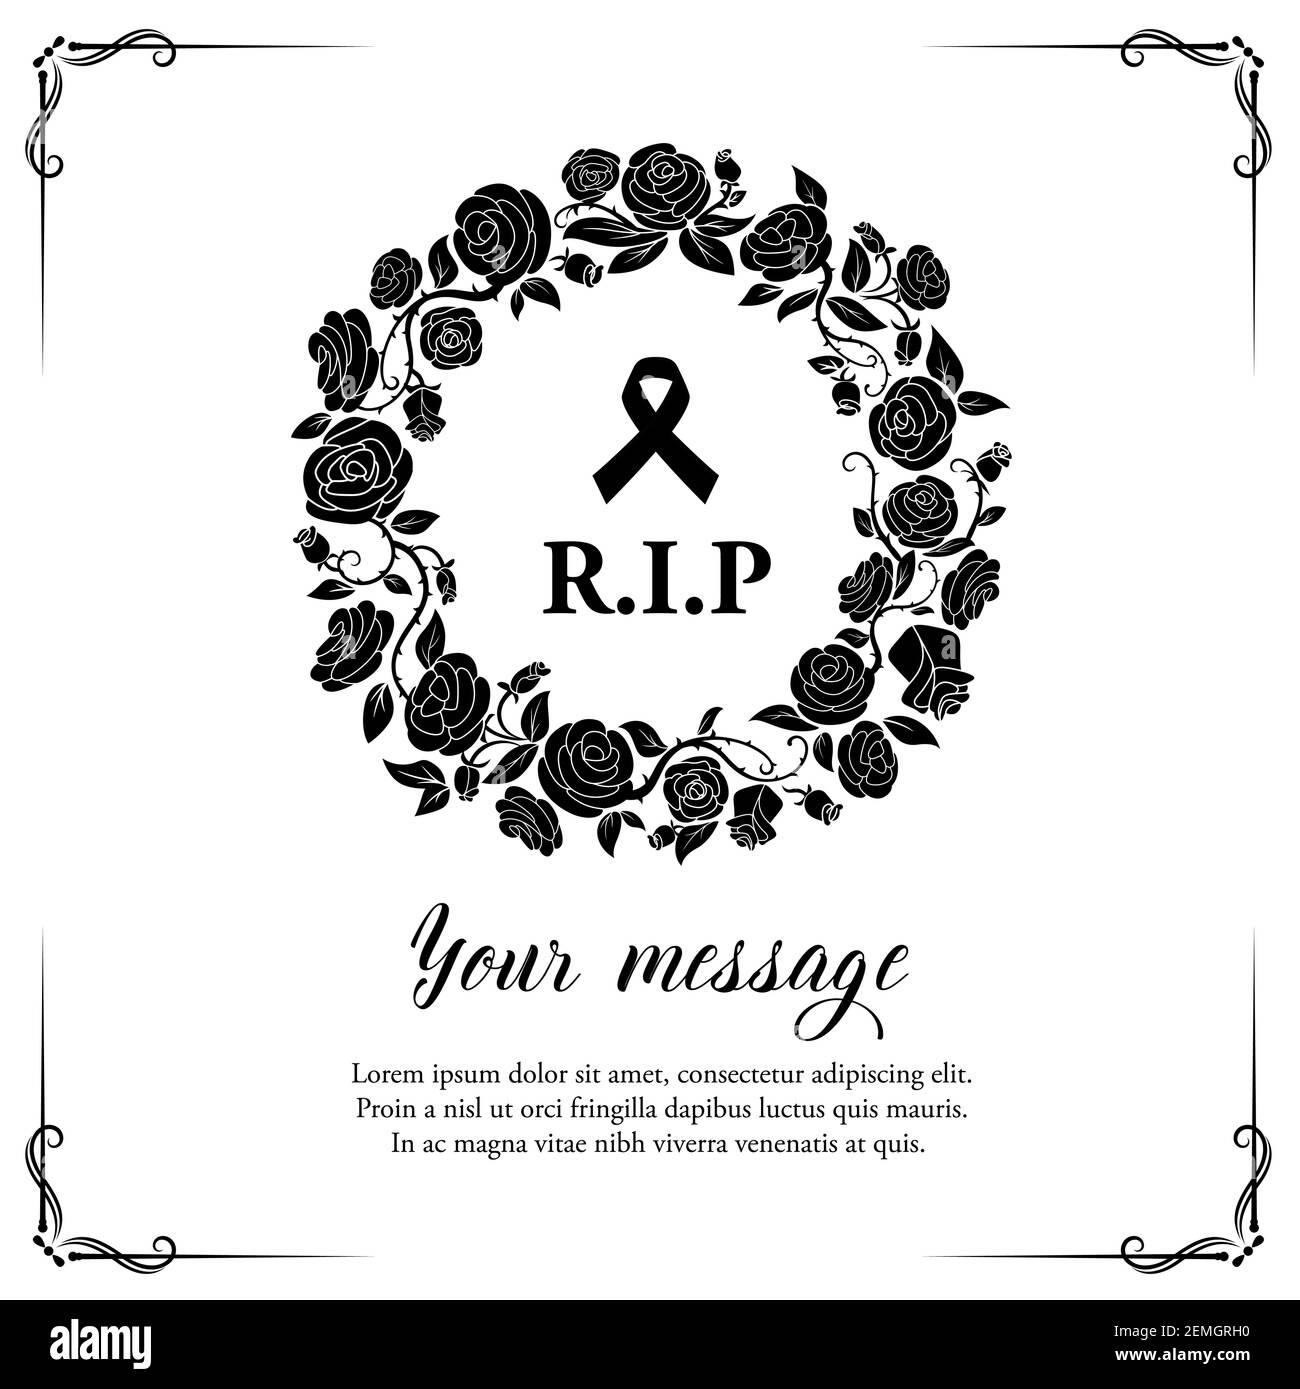 Mourning card Black and White Stock Photos & Images - Alamy